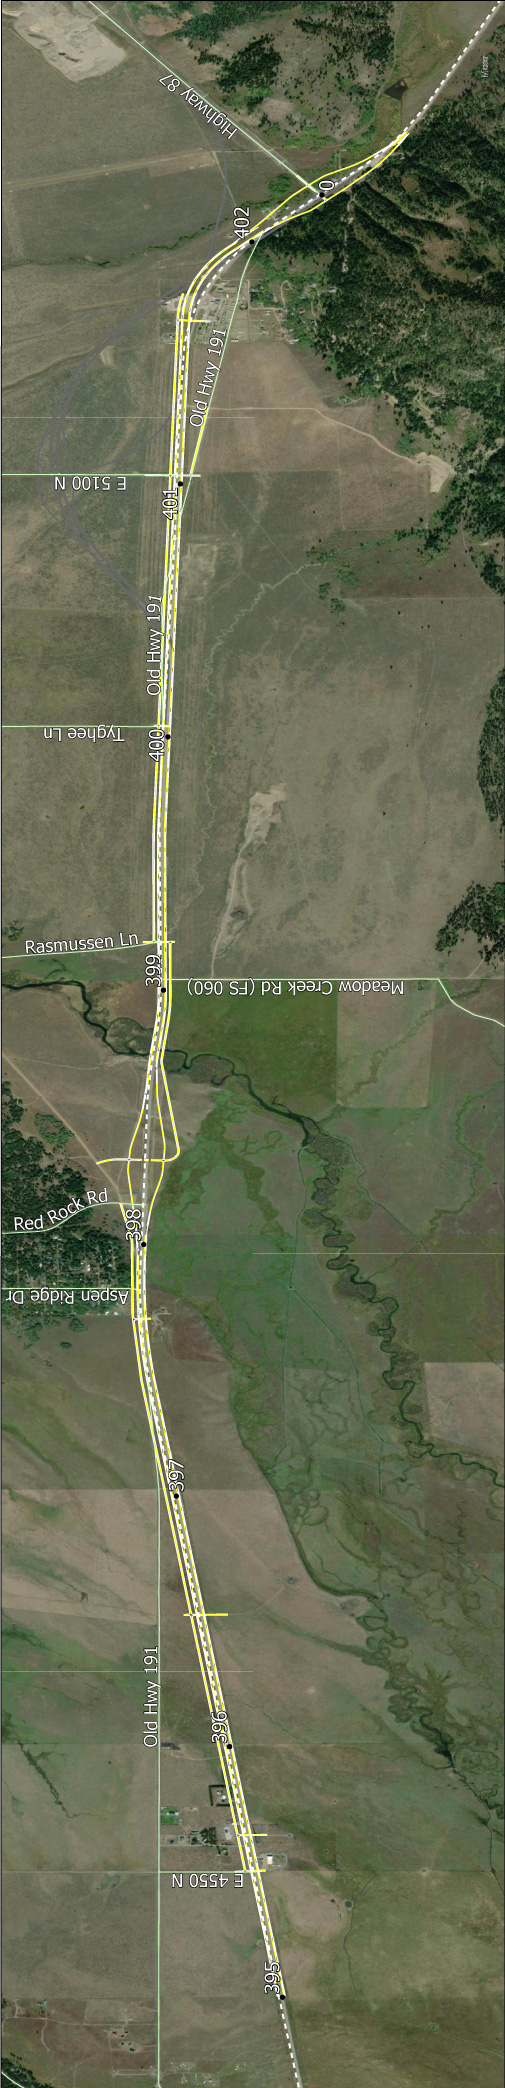 Map of Red Rock Road alternatives RR2.